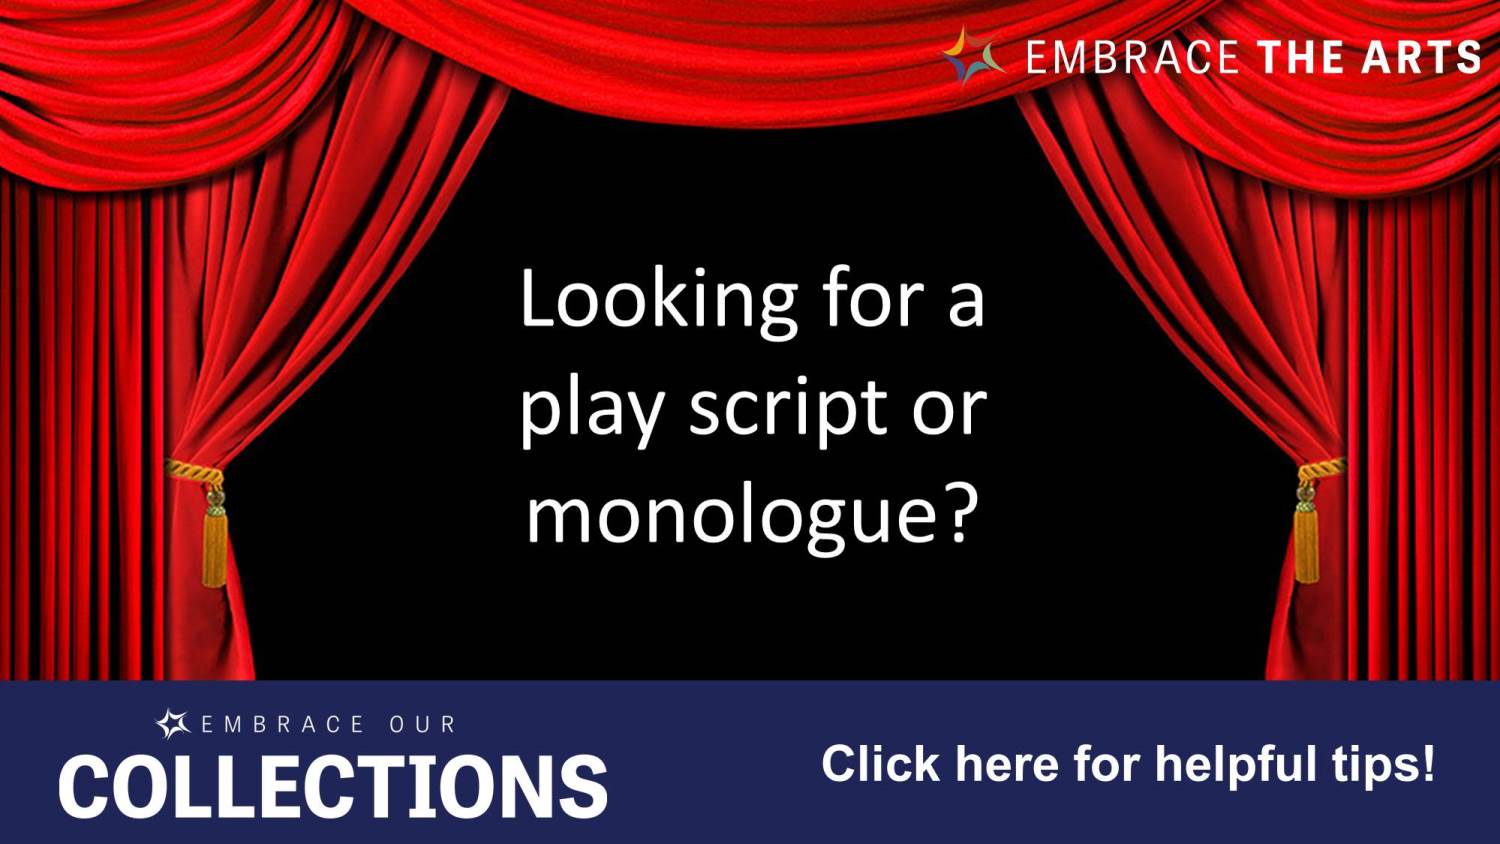 Finding Scripts and Monologues